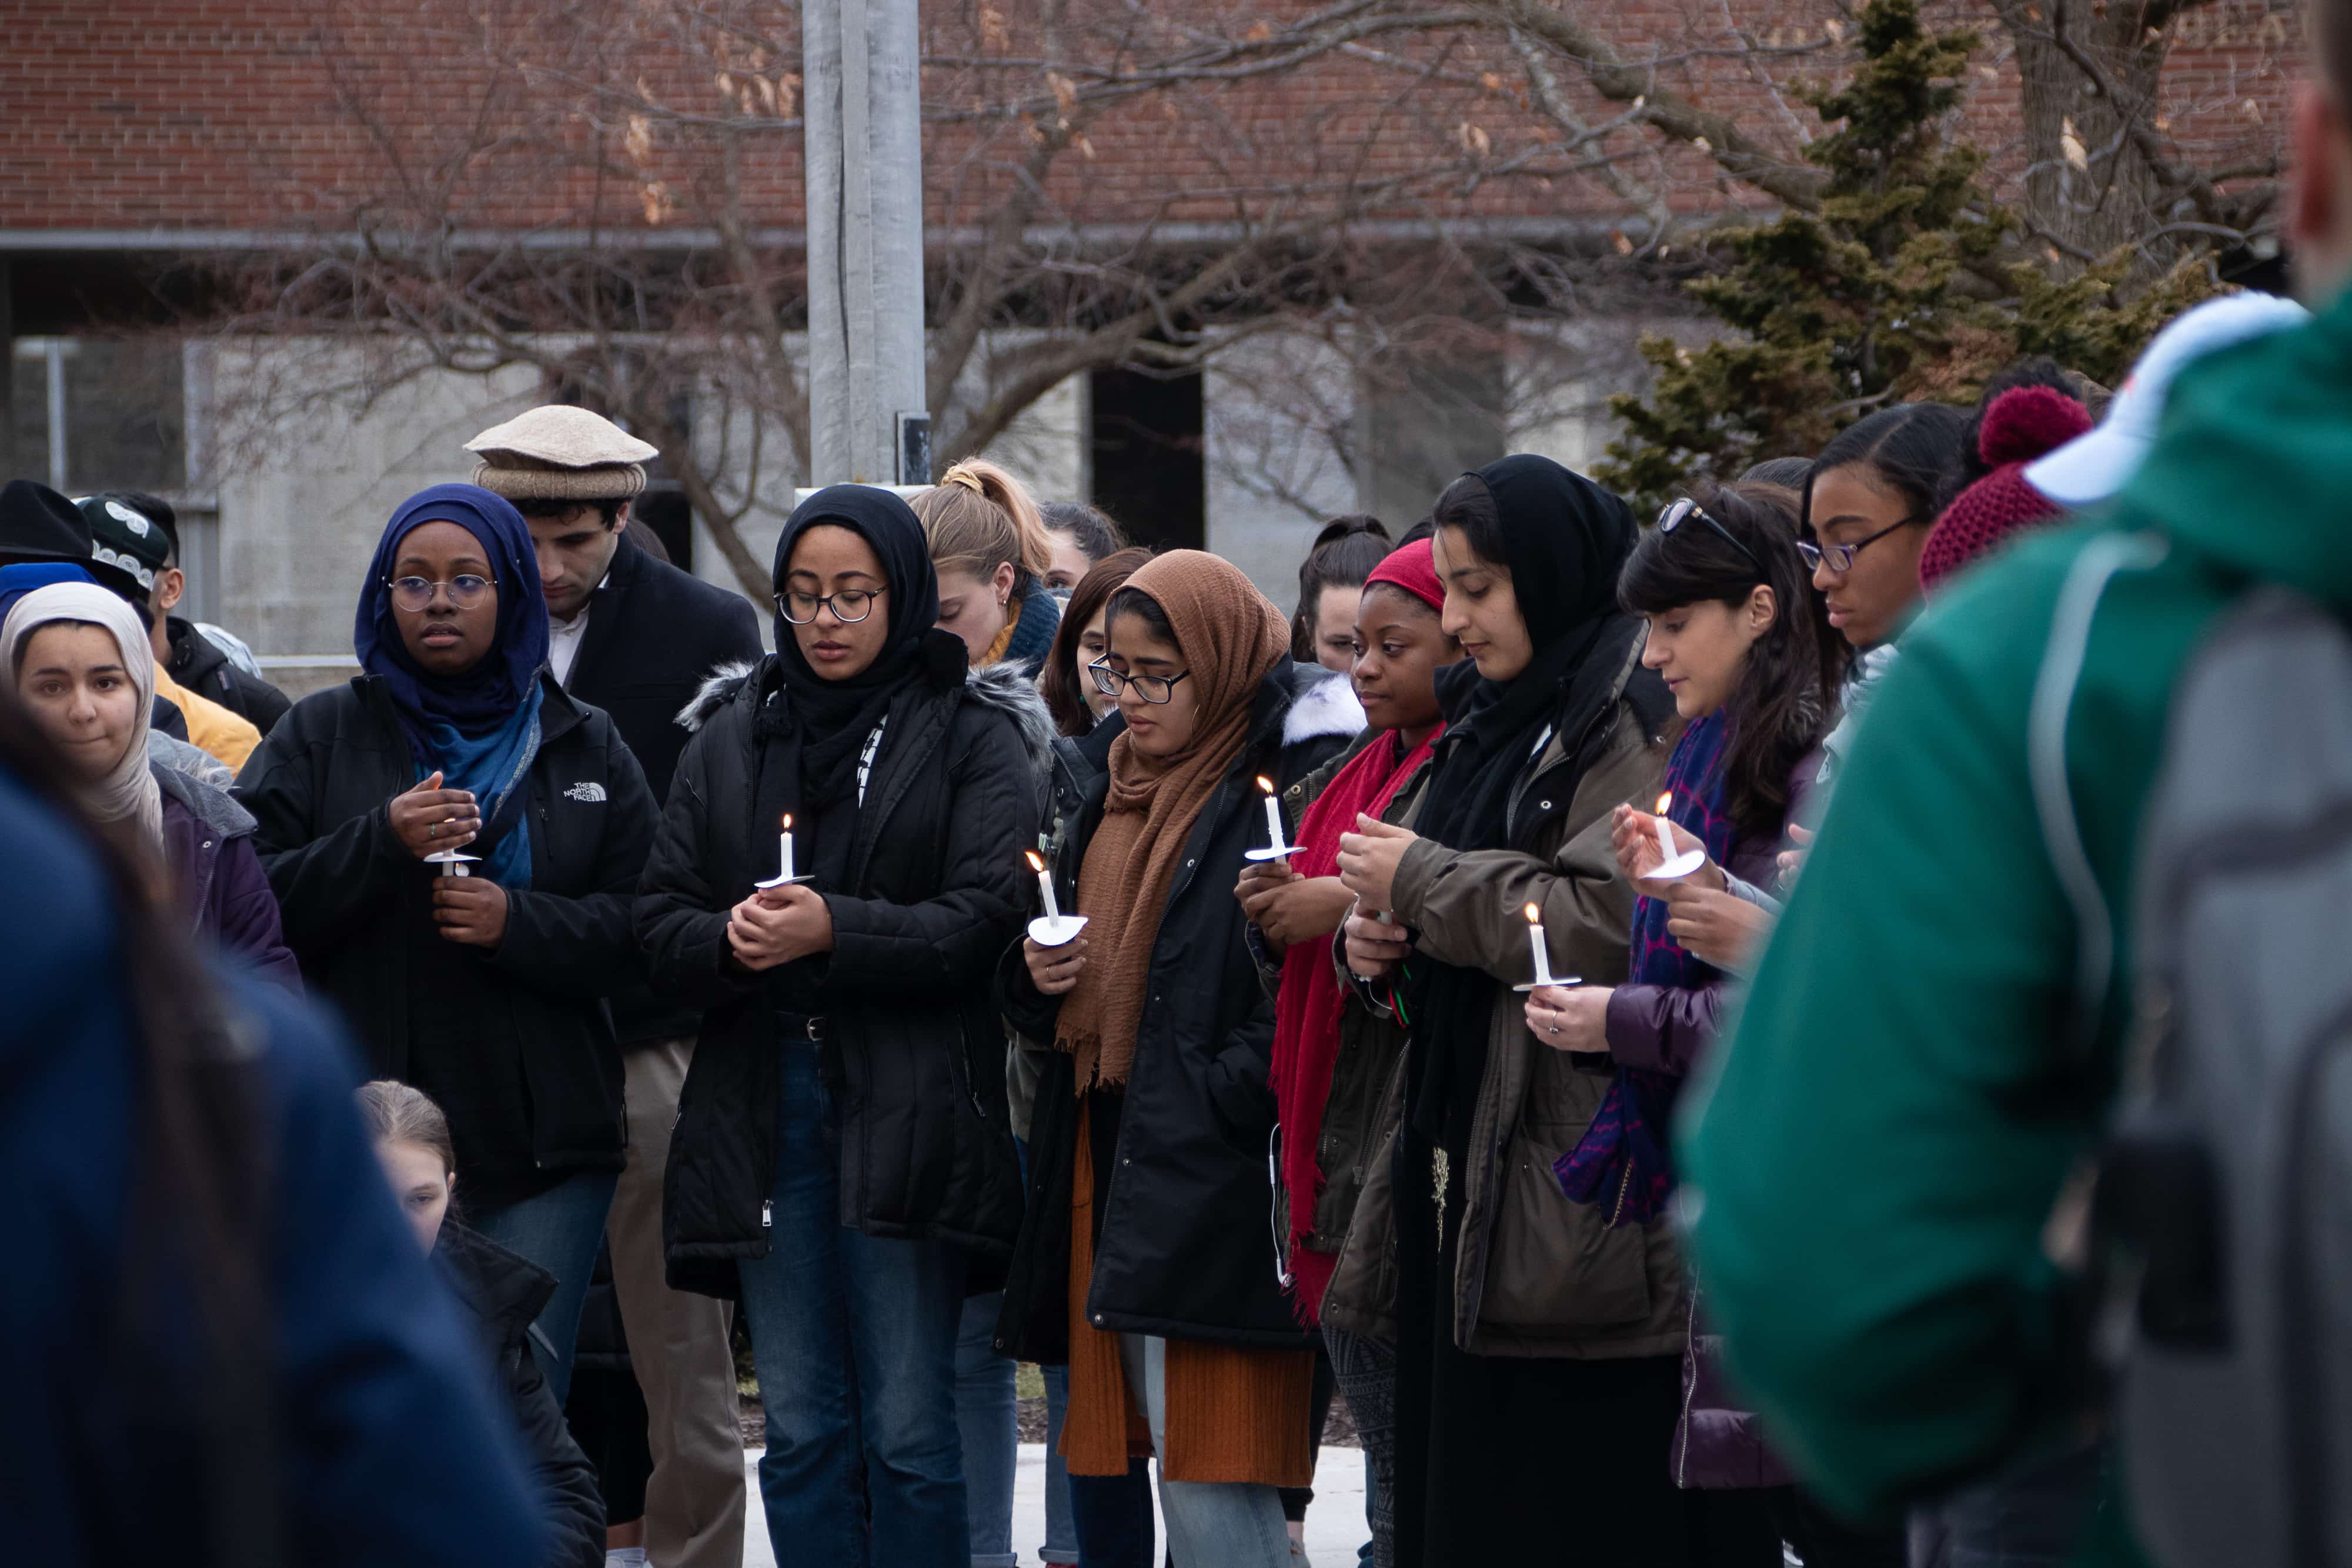 Outside Hendricks Chapel on Tuesday, Syracuse students take a moment of silence to remember the 50 people killed in mosque shootings in Christchurch, New Zealand.